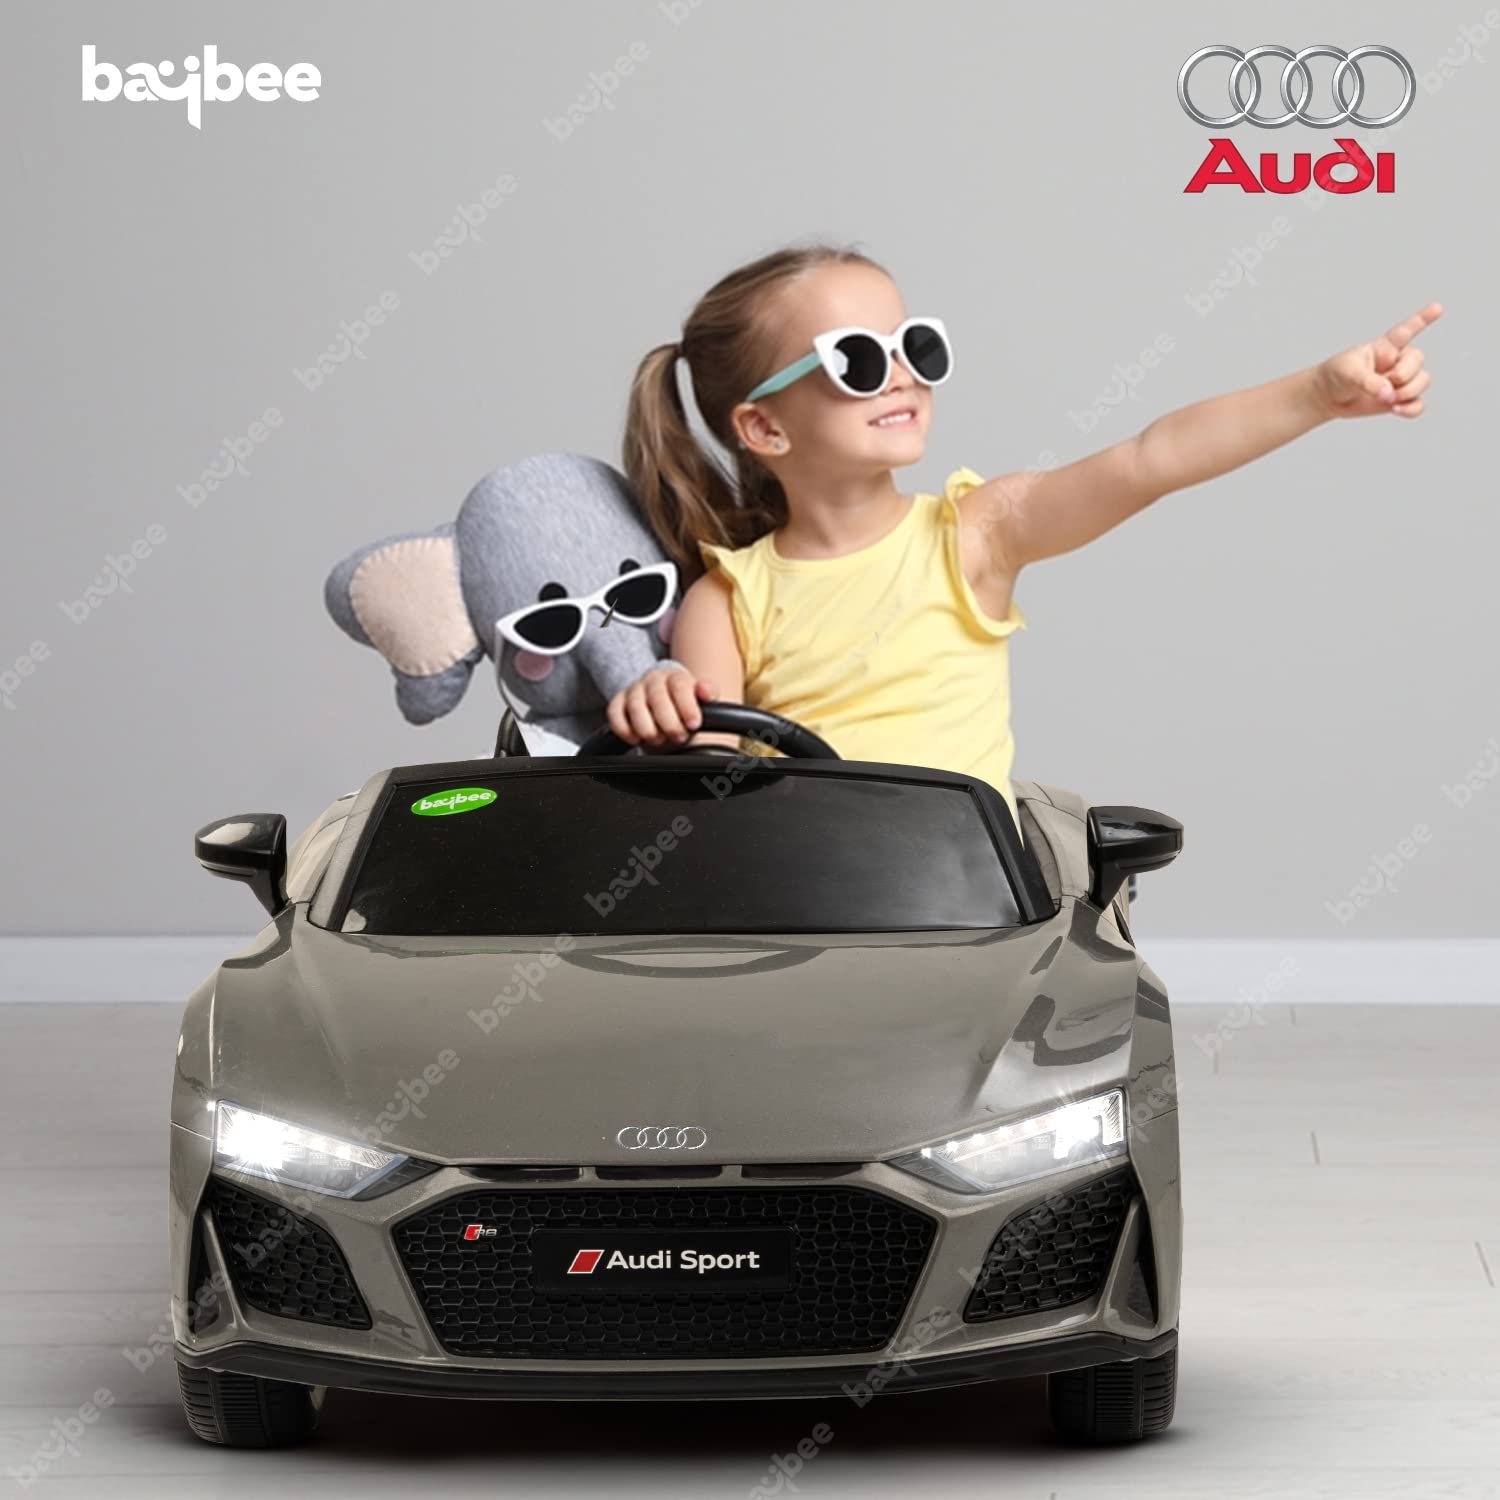 Audi R8 Official Licensed Kids Electric Rideon Car Age 1-5 Years (Metallic Grey)